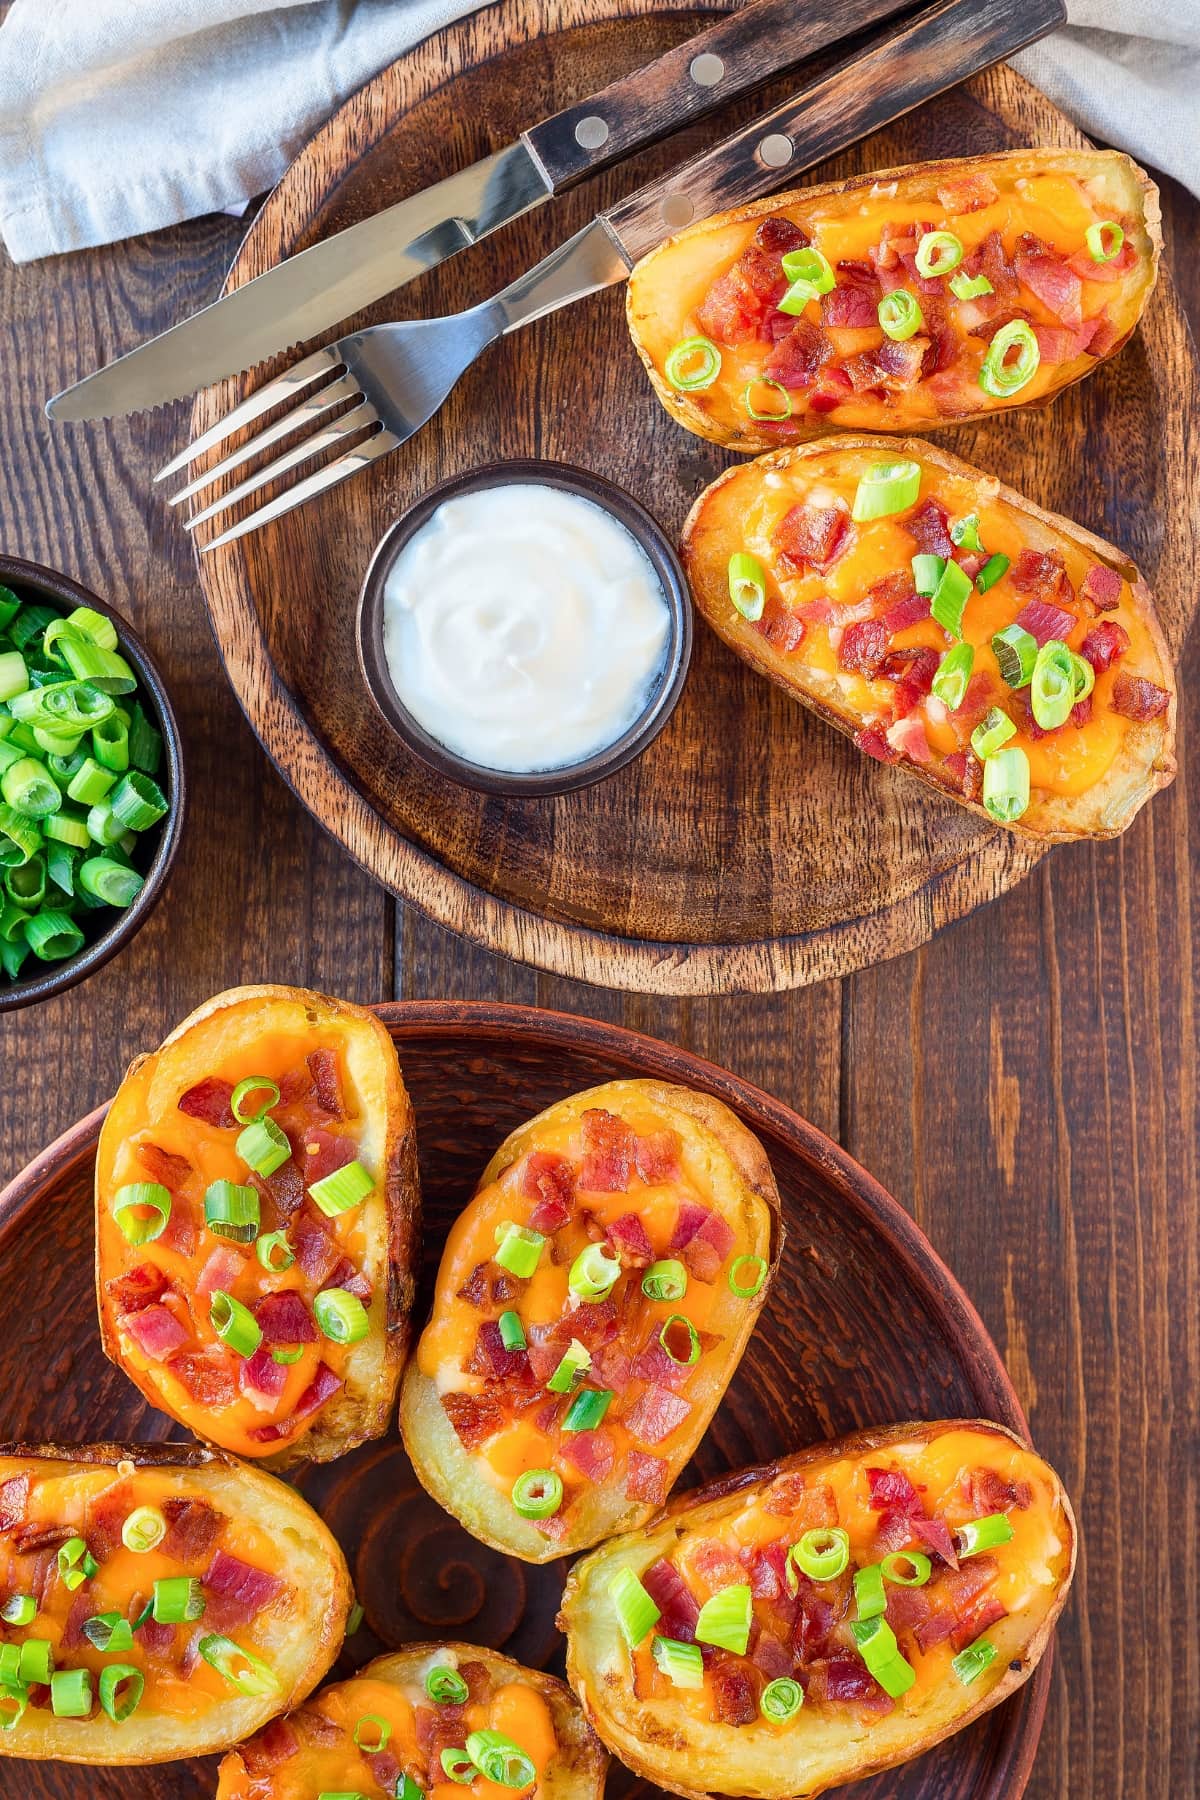 Potato skins with cheesy filling on a wooden tray served with sour cream garnished with bacon and chopped onions.